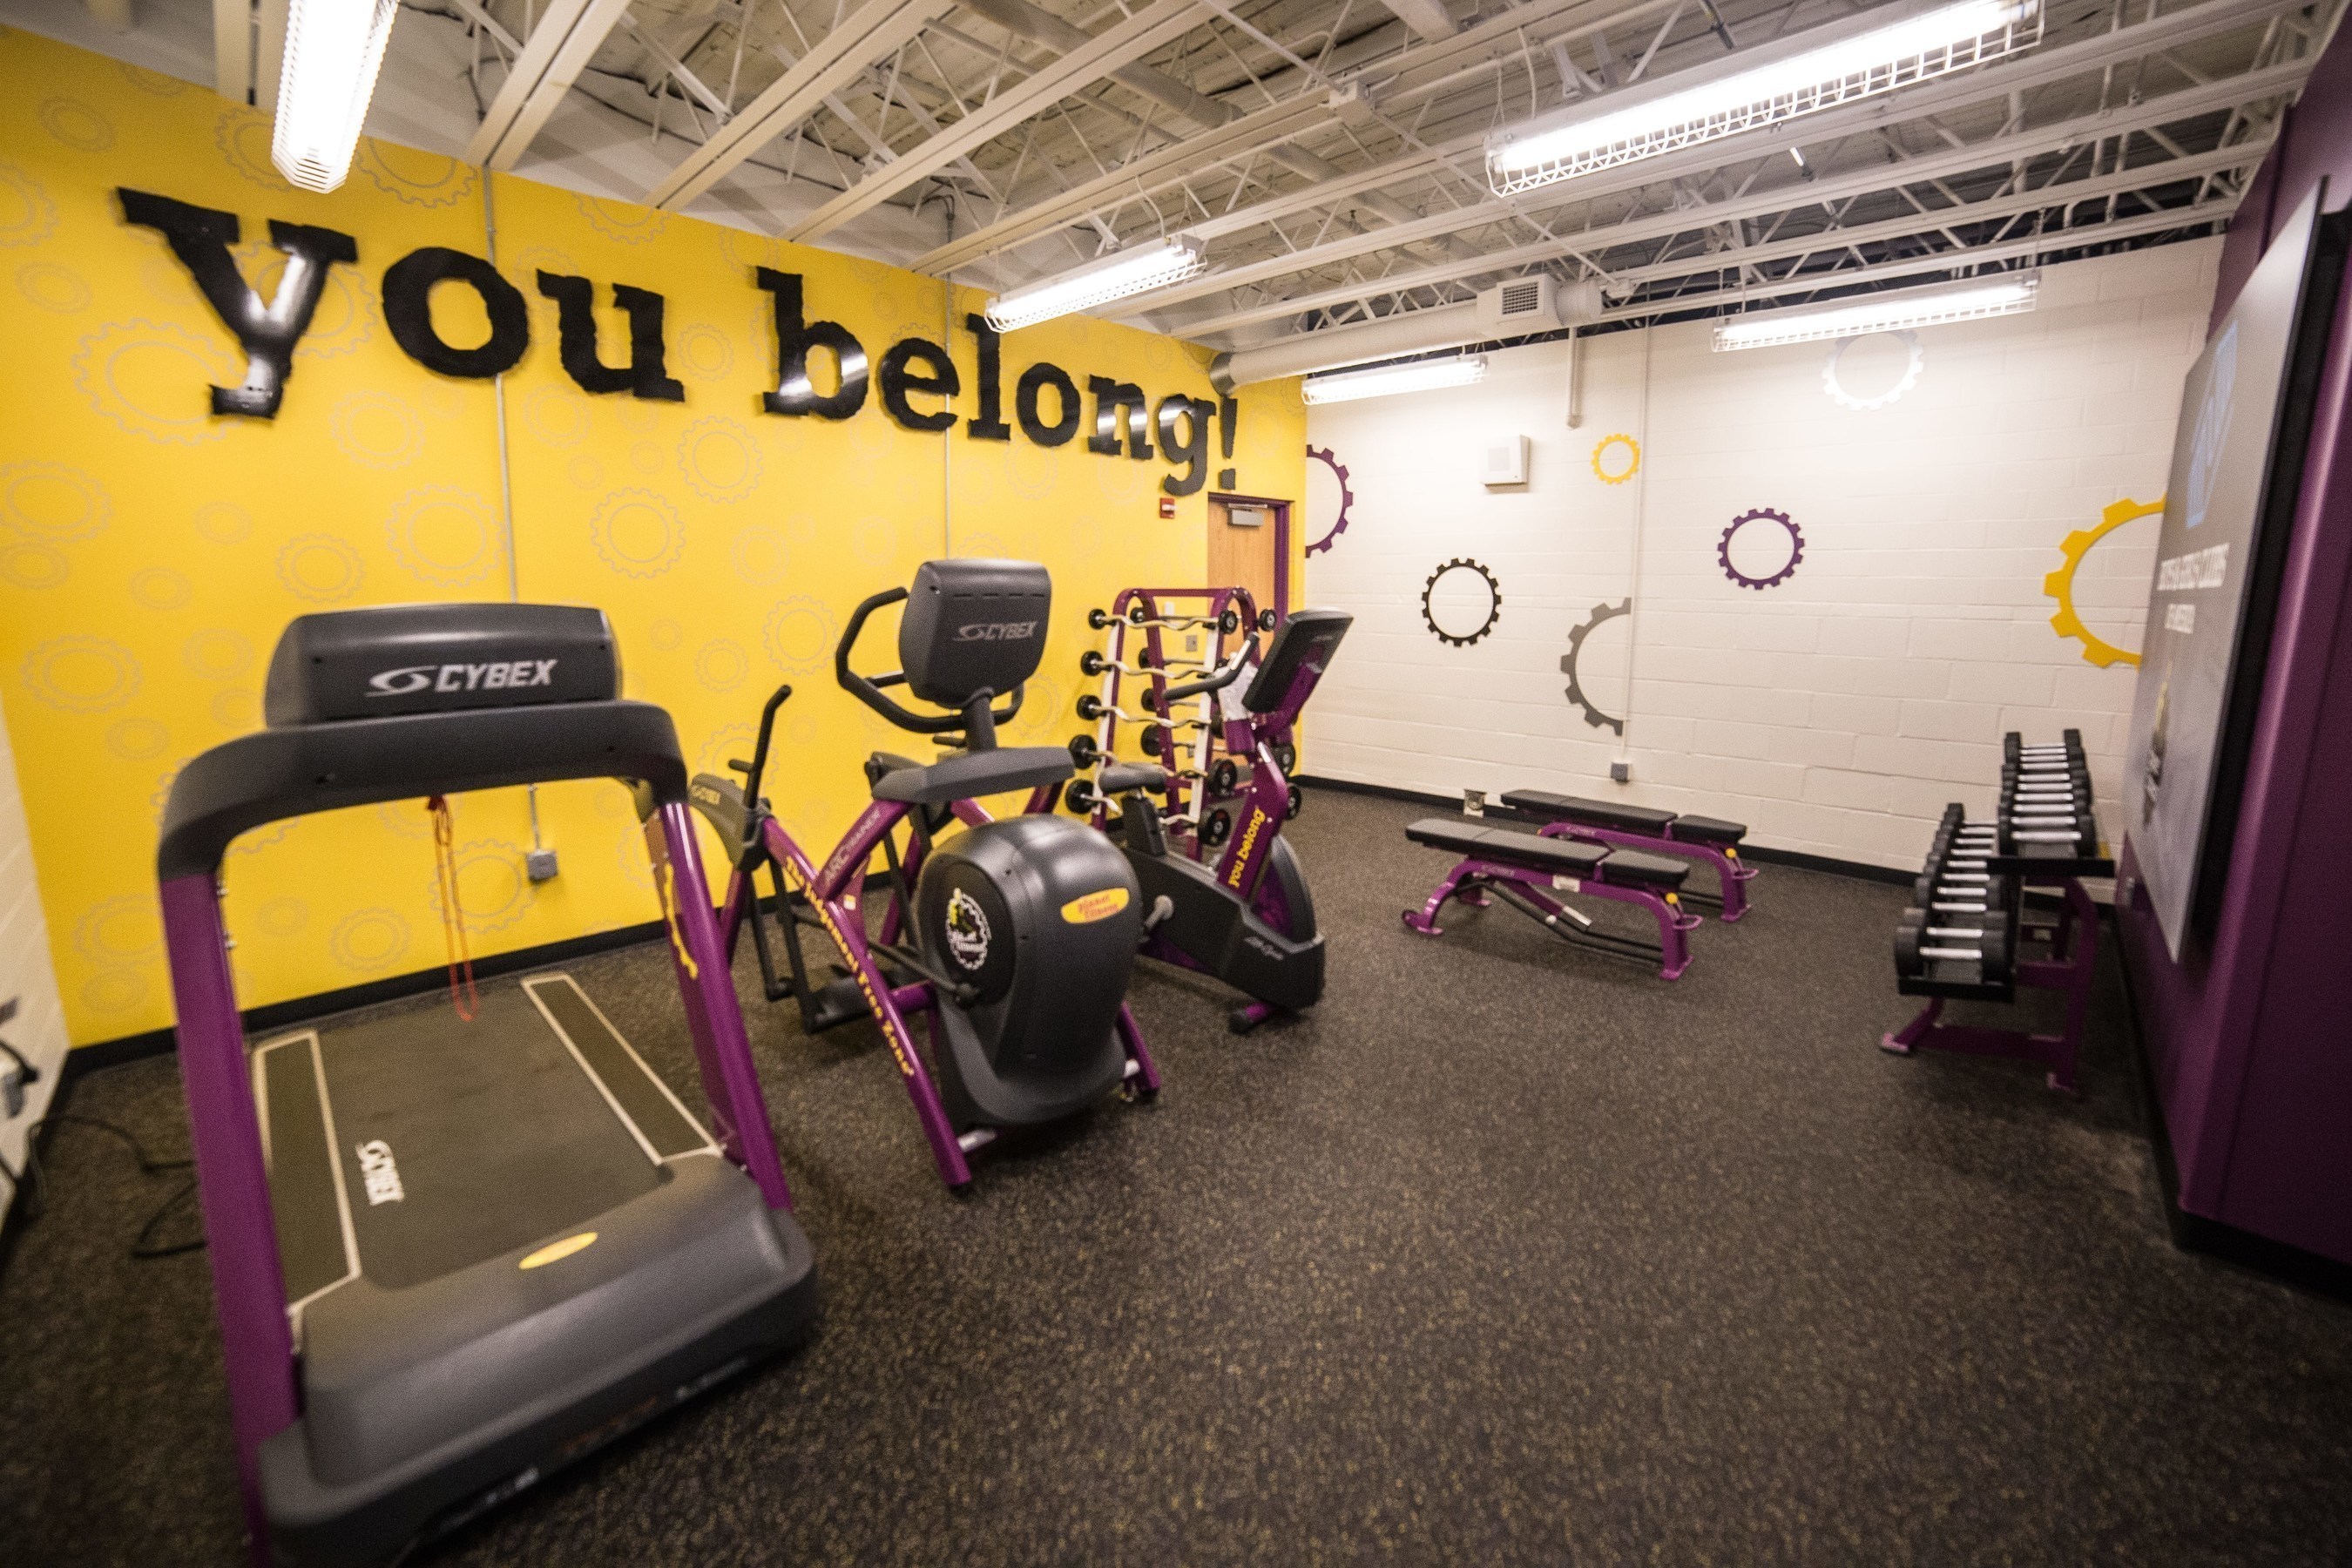 Planet Fitness builds first ever "Judgement Free" fitness center within a Boys & Girls Club as part of National Anti-Bullying Initiative